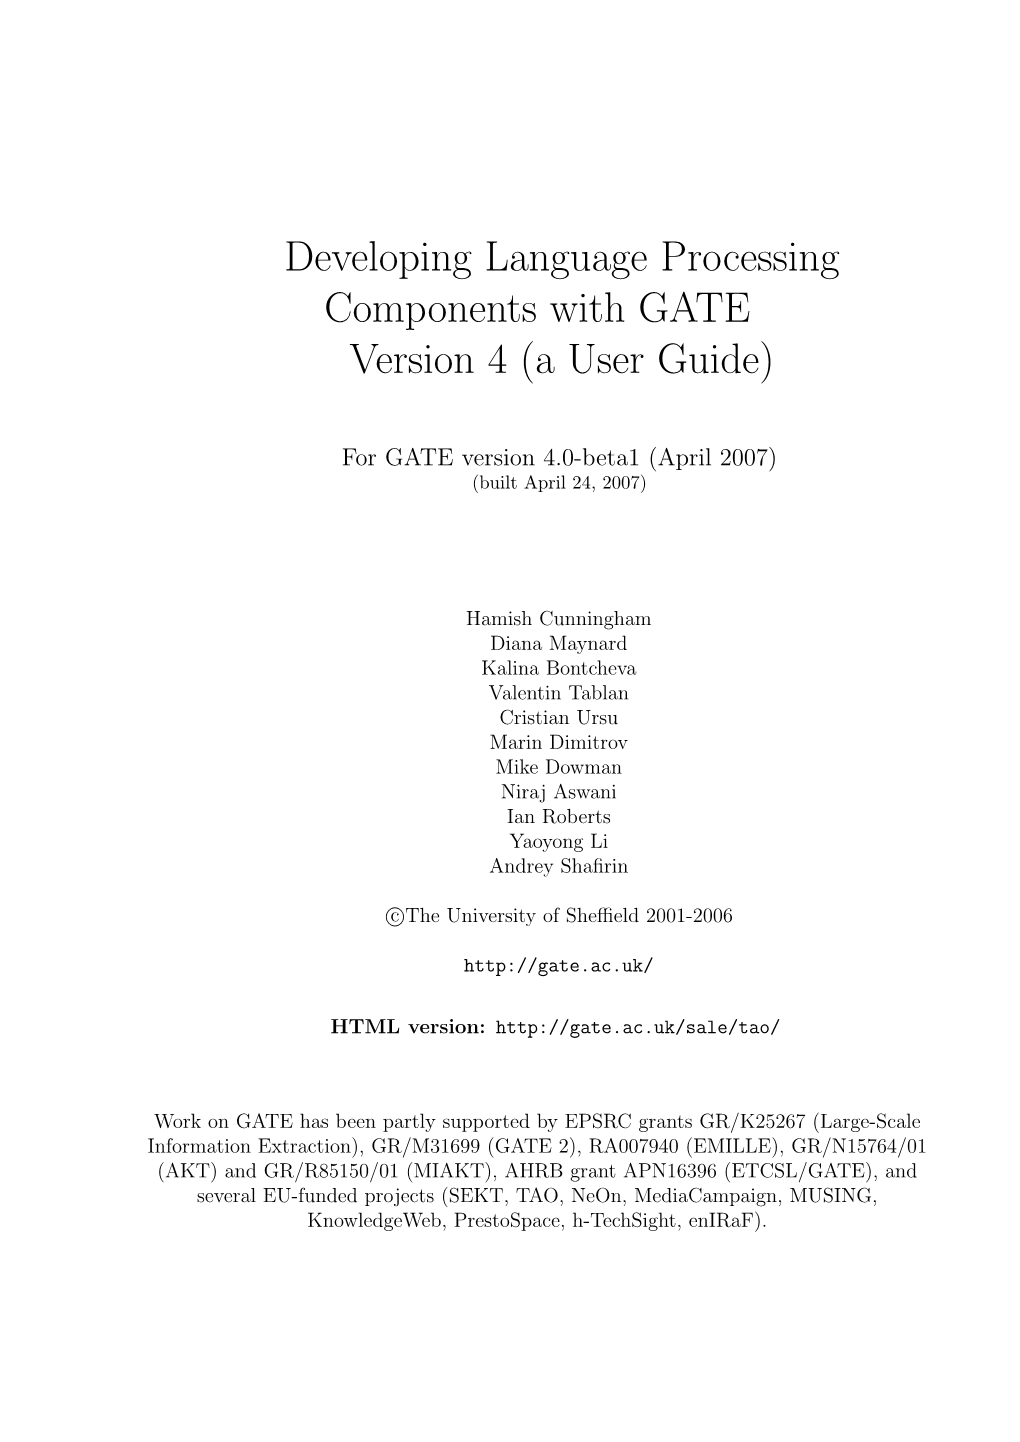 Developing Language Processing Components with GATE Version 4 (A User Guide)